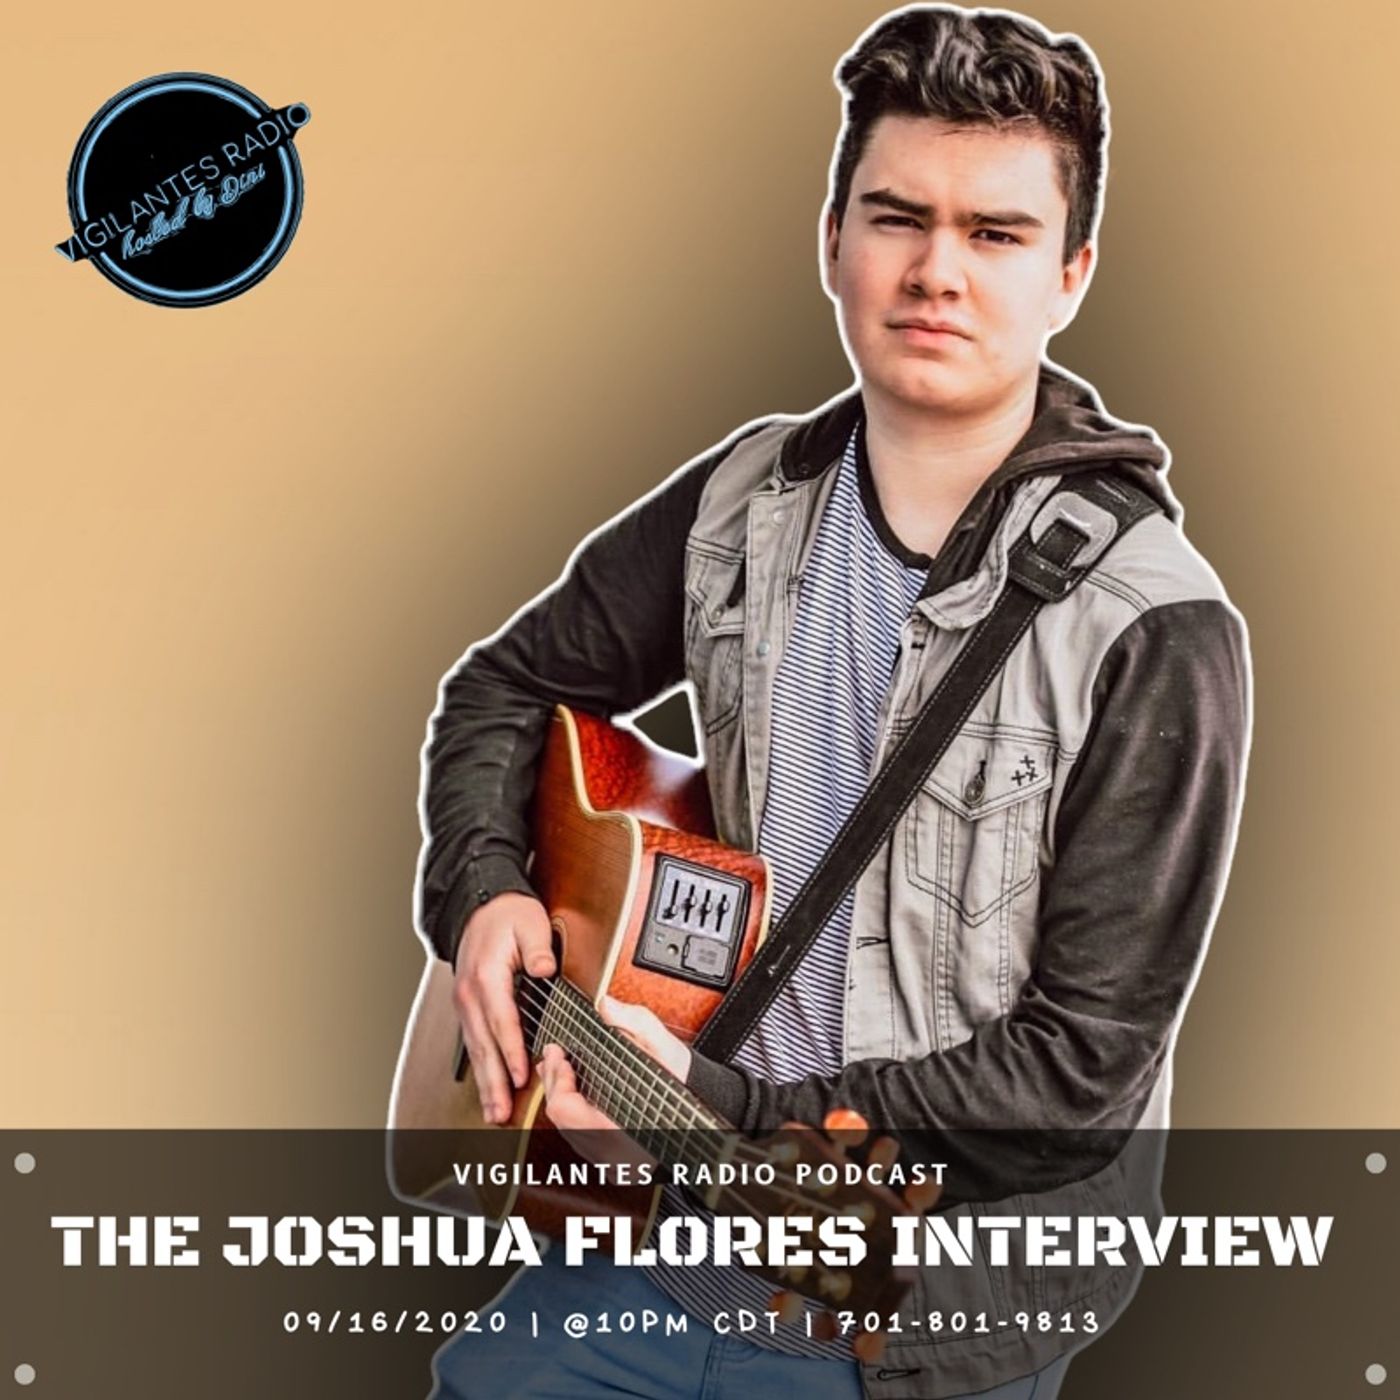 The Joshua Flores Interview. Image